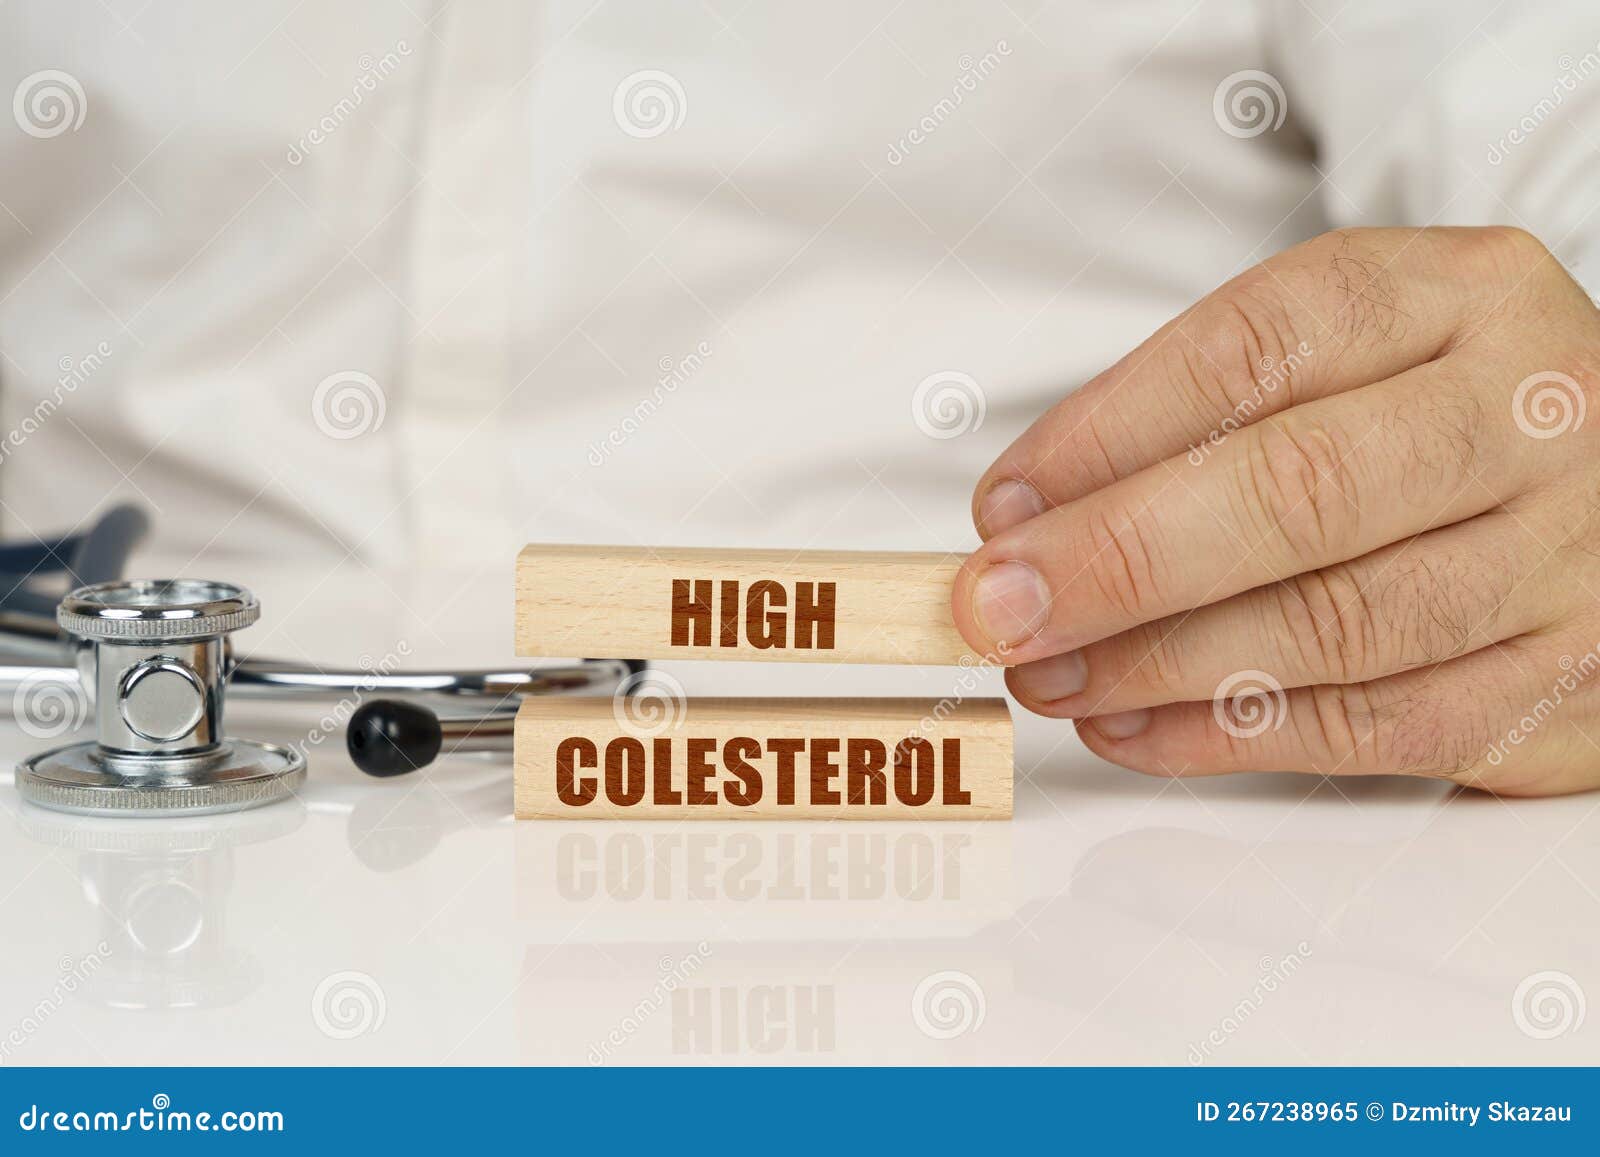 on a white surface, a stethoscope and wooden plates with the inscription - high colesterol